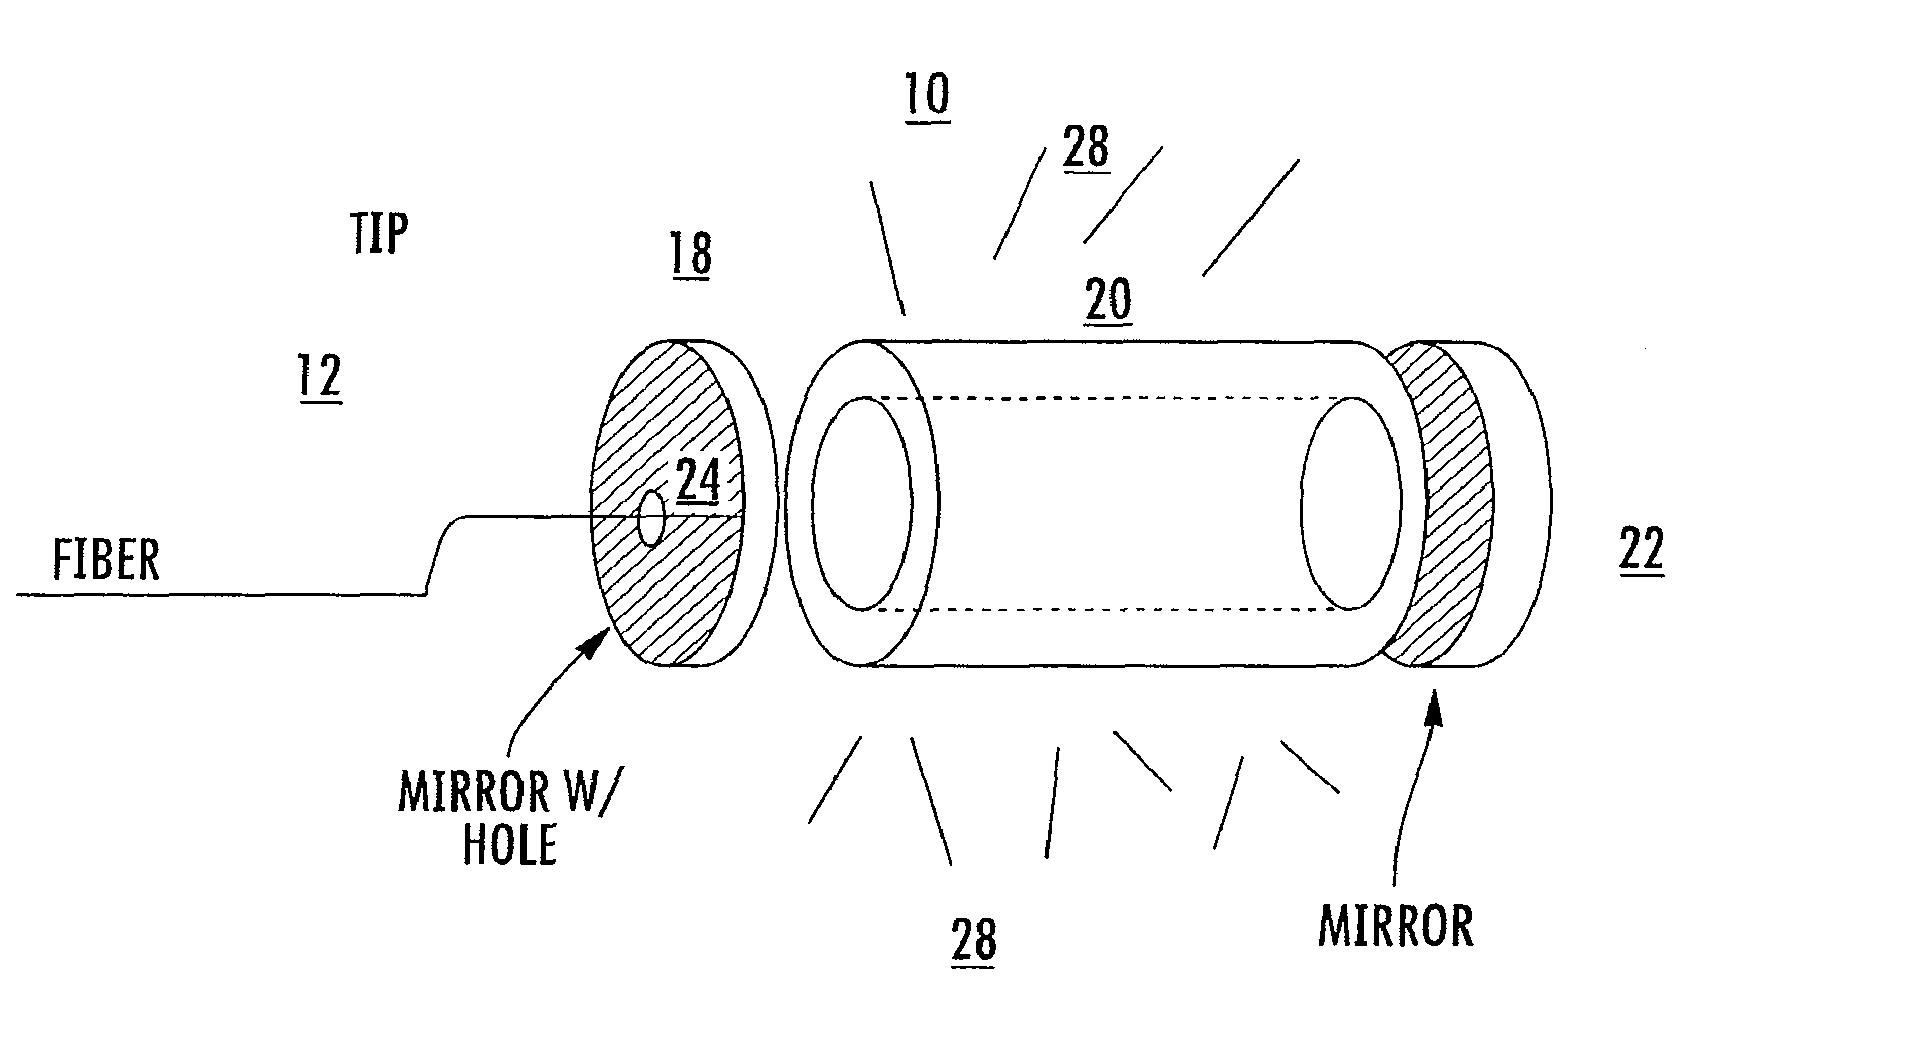 Therapeutic light delivery apparatus, method, and system